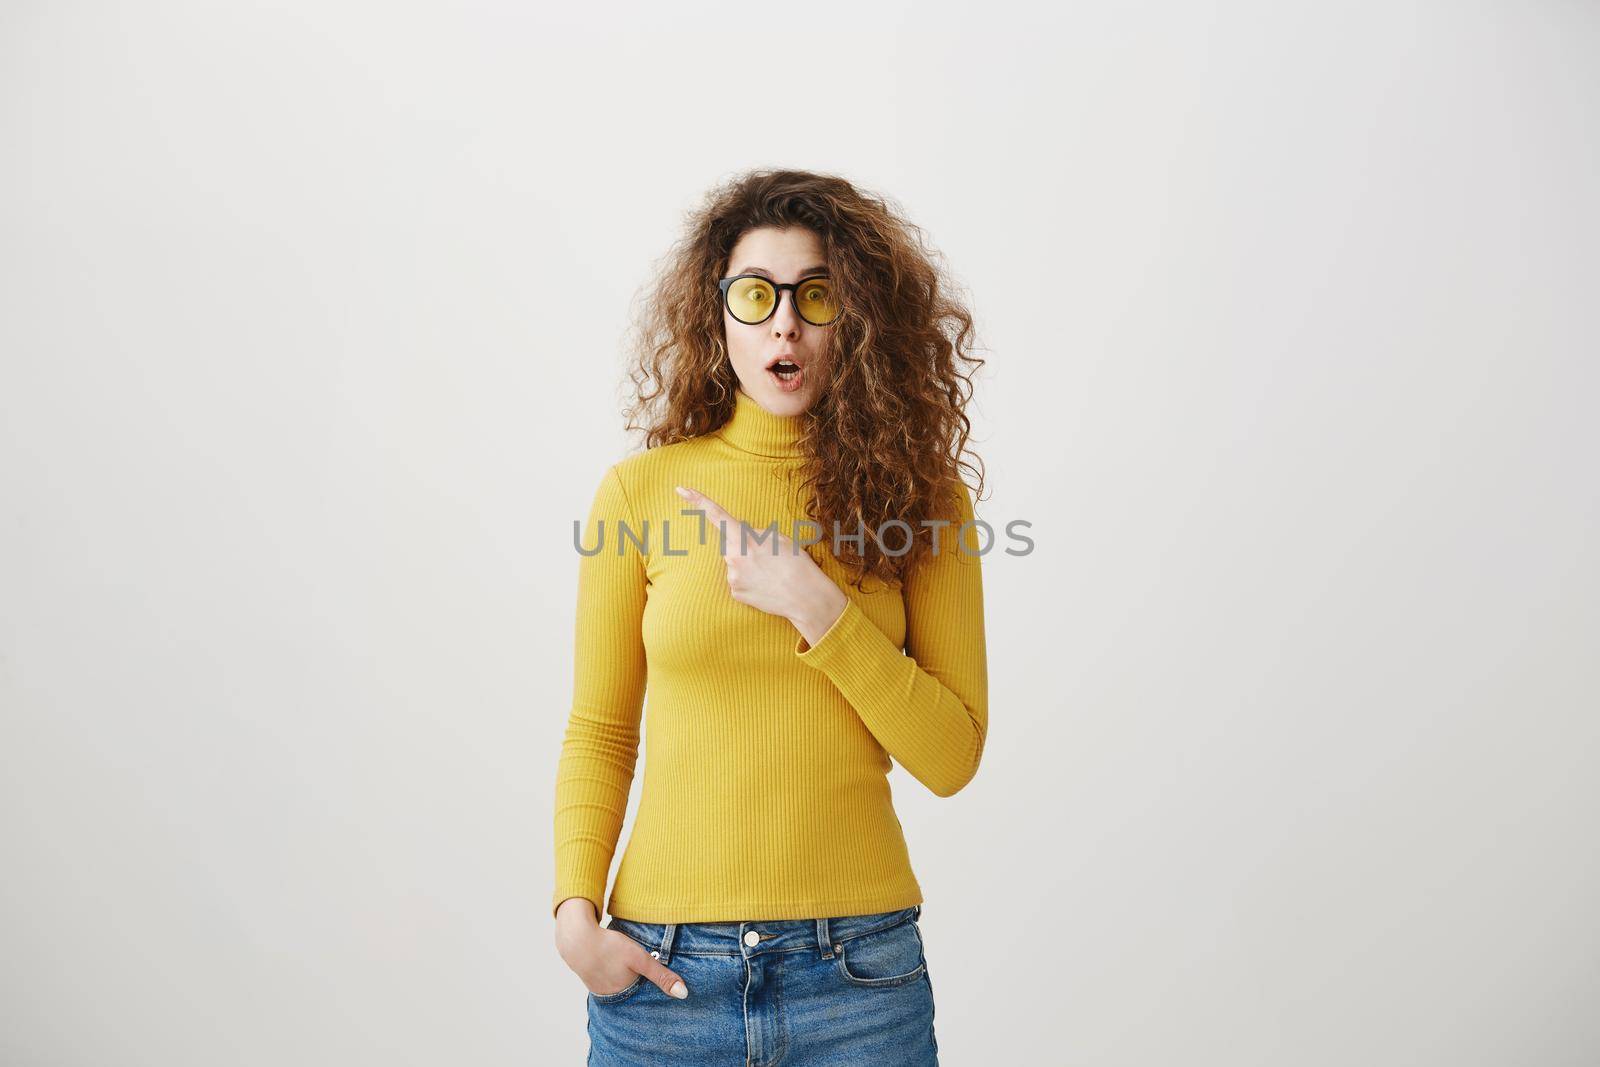 Excited young woman pointing her finger towards blank space isolated over grey background